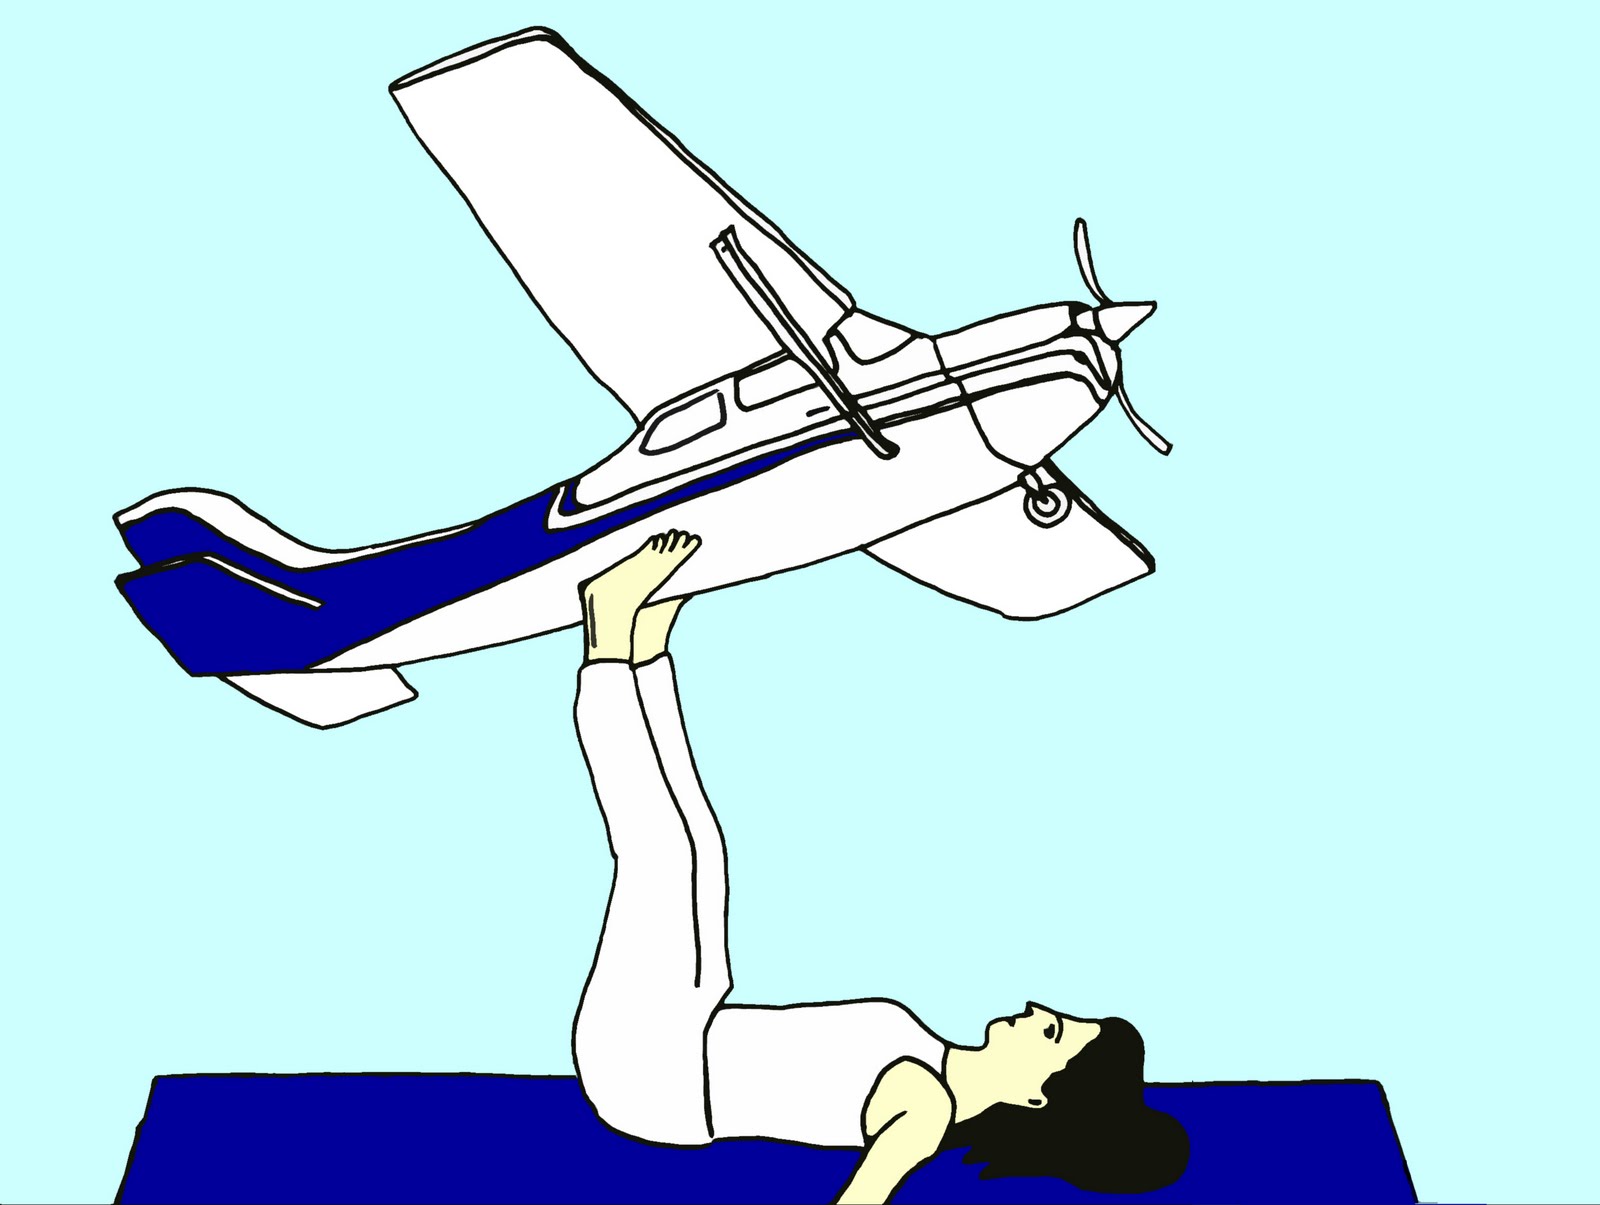 birdlette: pushing up an airplane with your feet